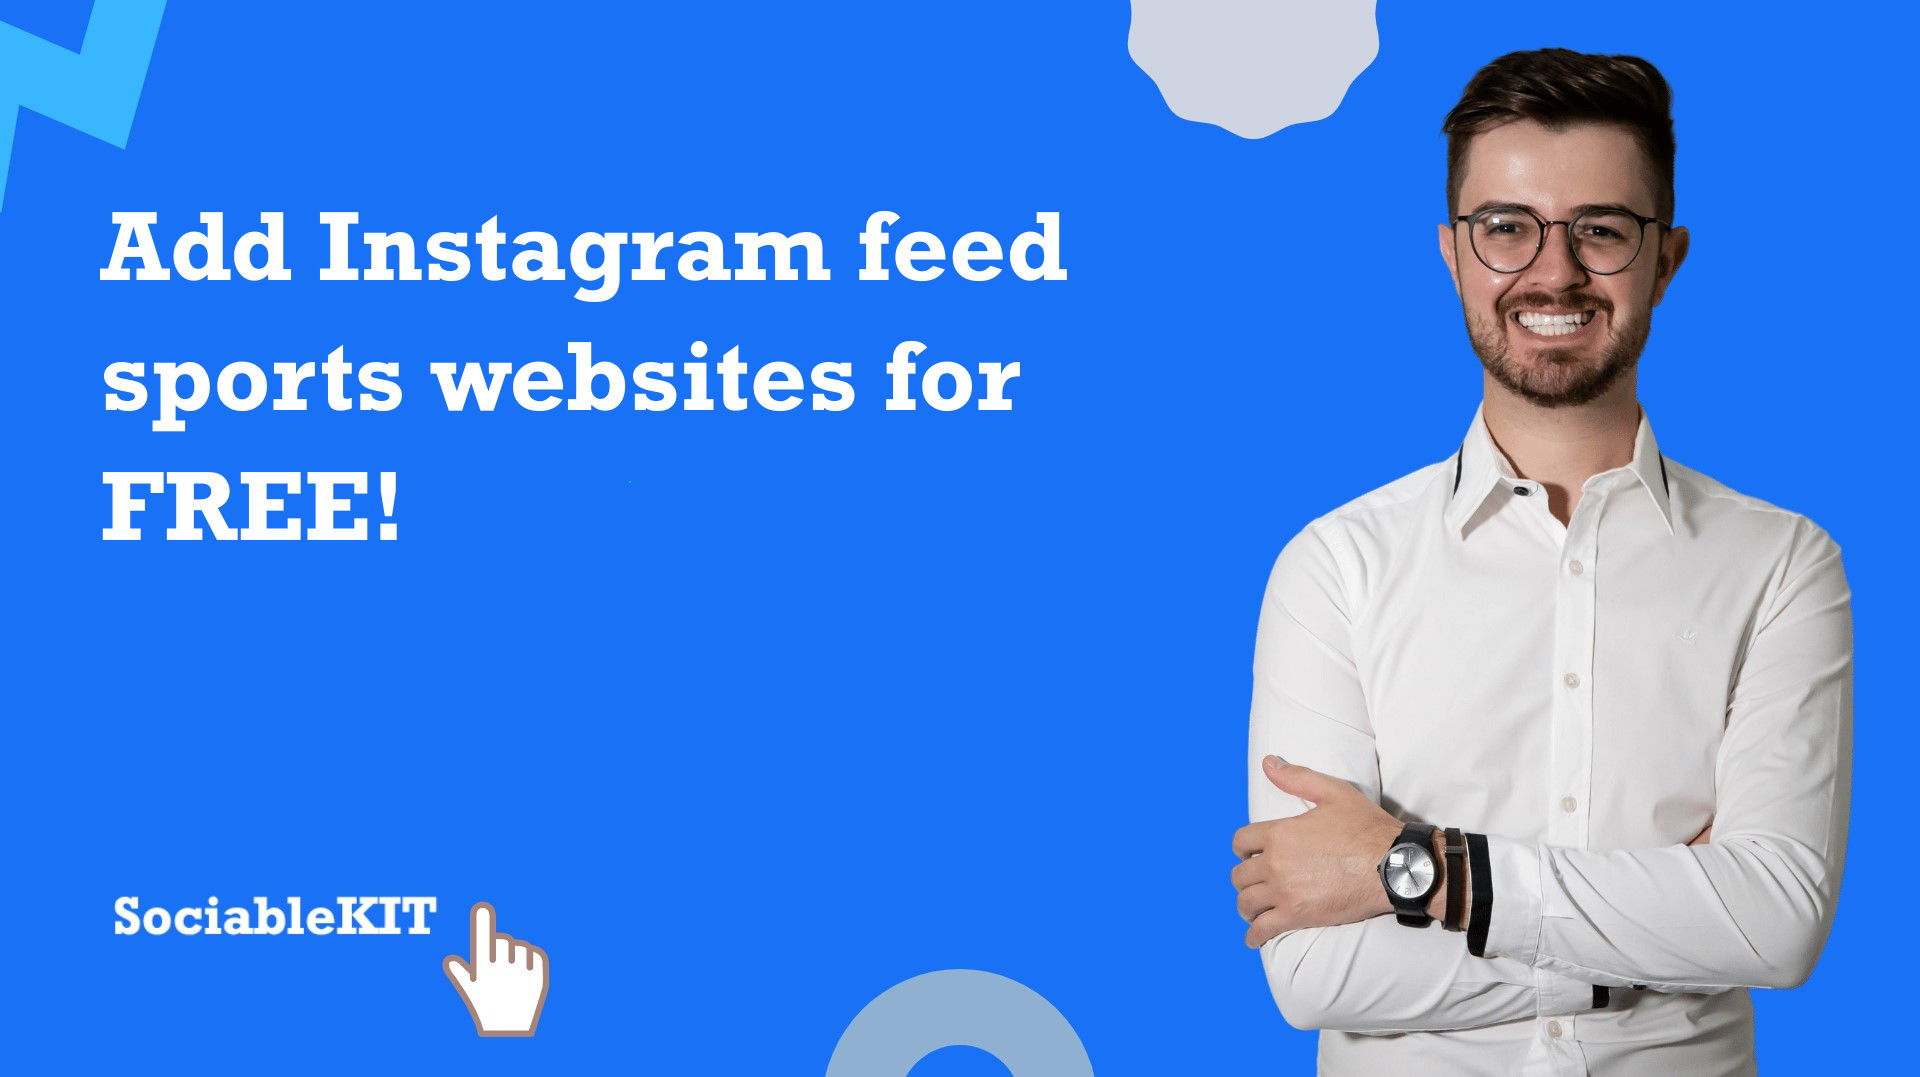 How to add Instagram feed sports websites for FREE?